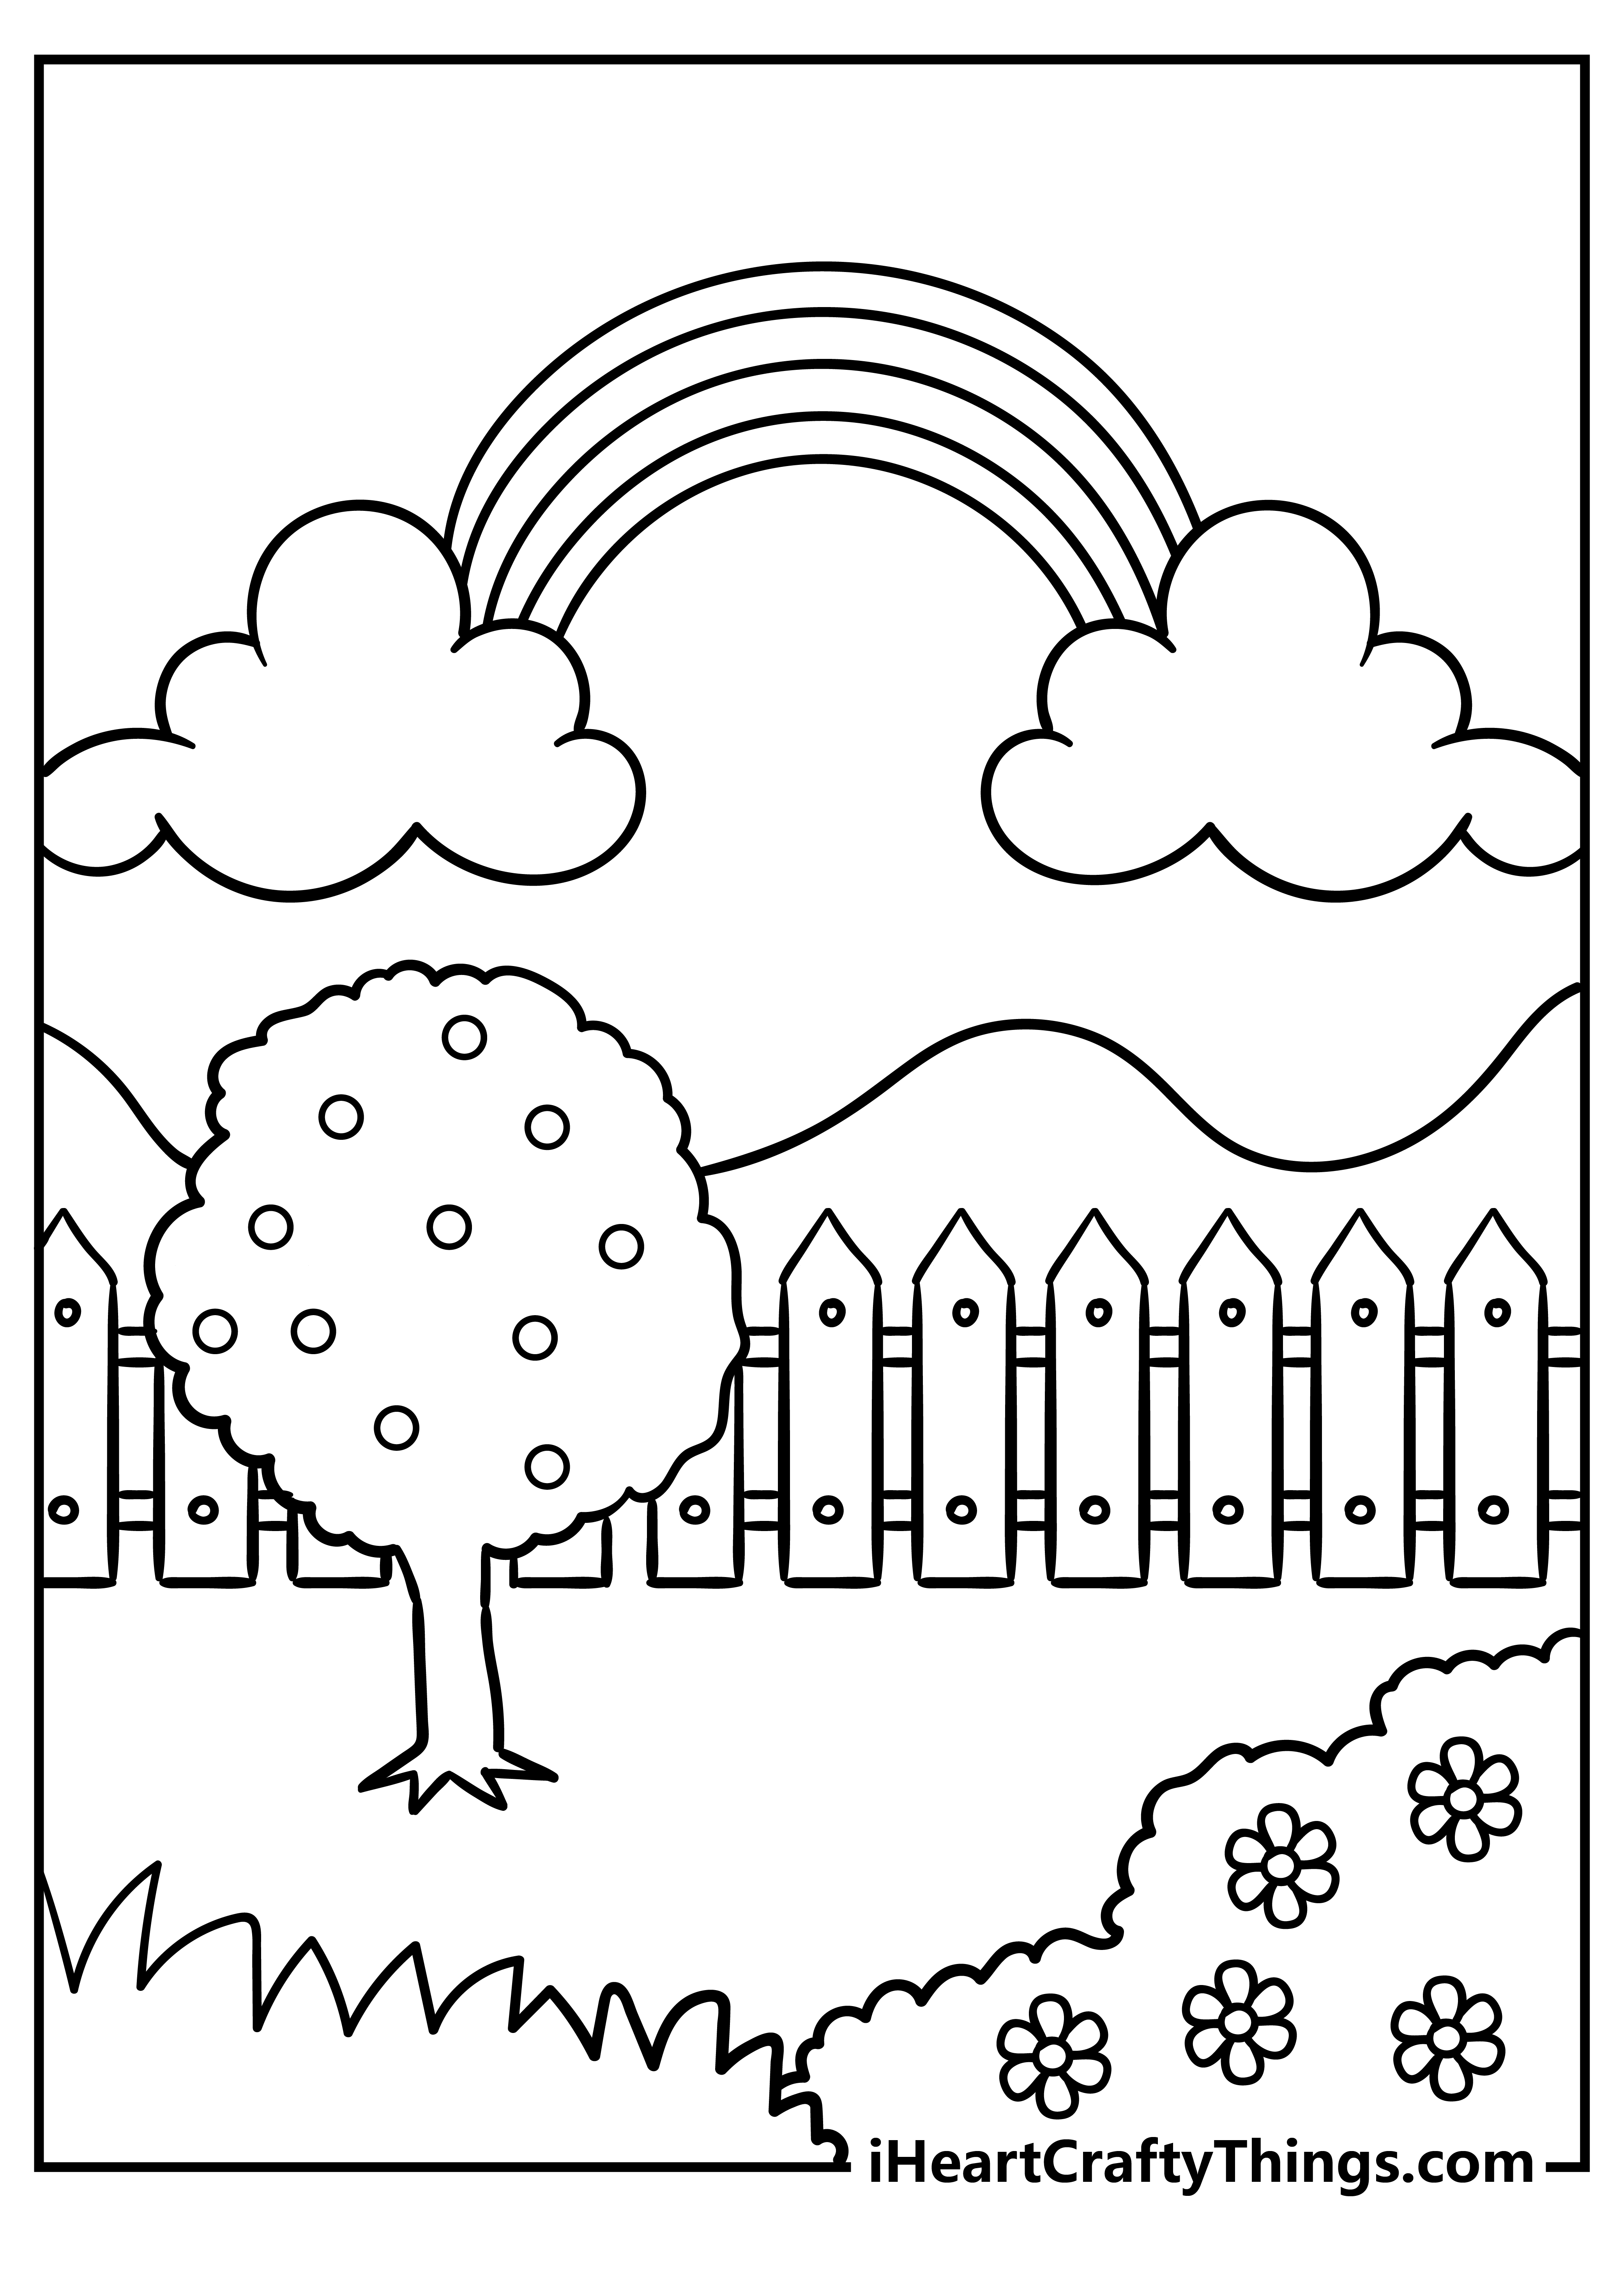 Printable Garden Coloring Pages Updated 20